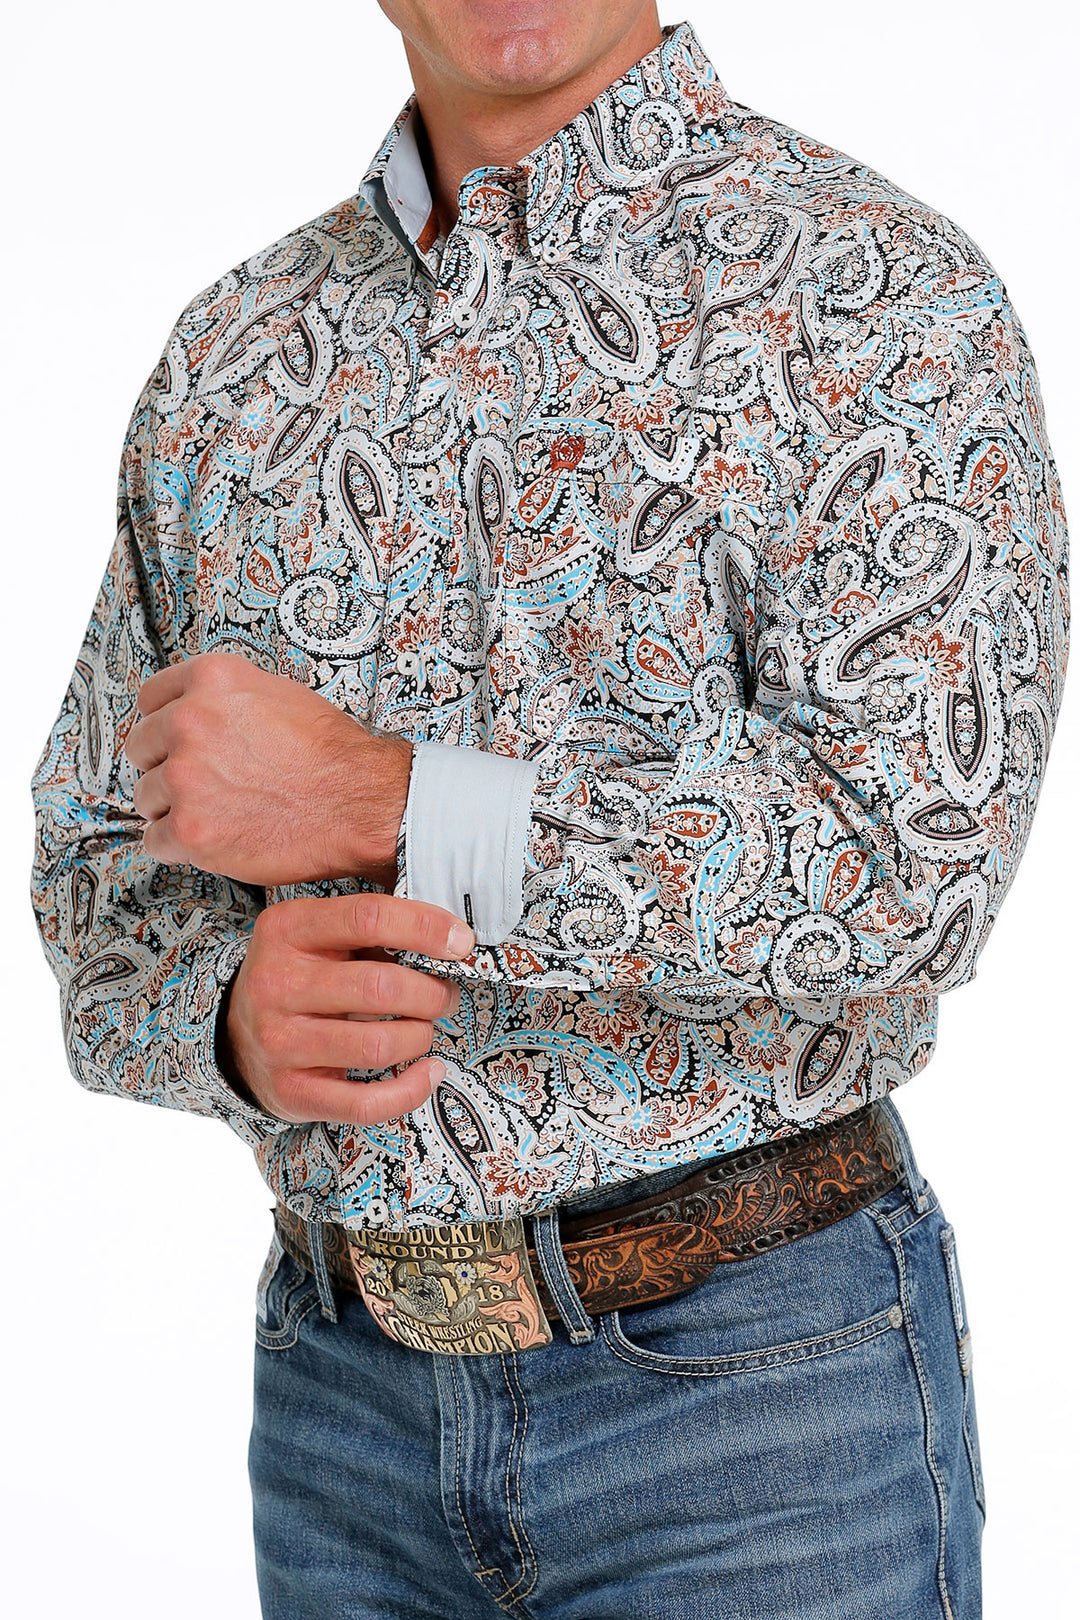 Cinch Men's Paisley Mulitcolored Button Down Western Shirt